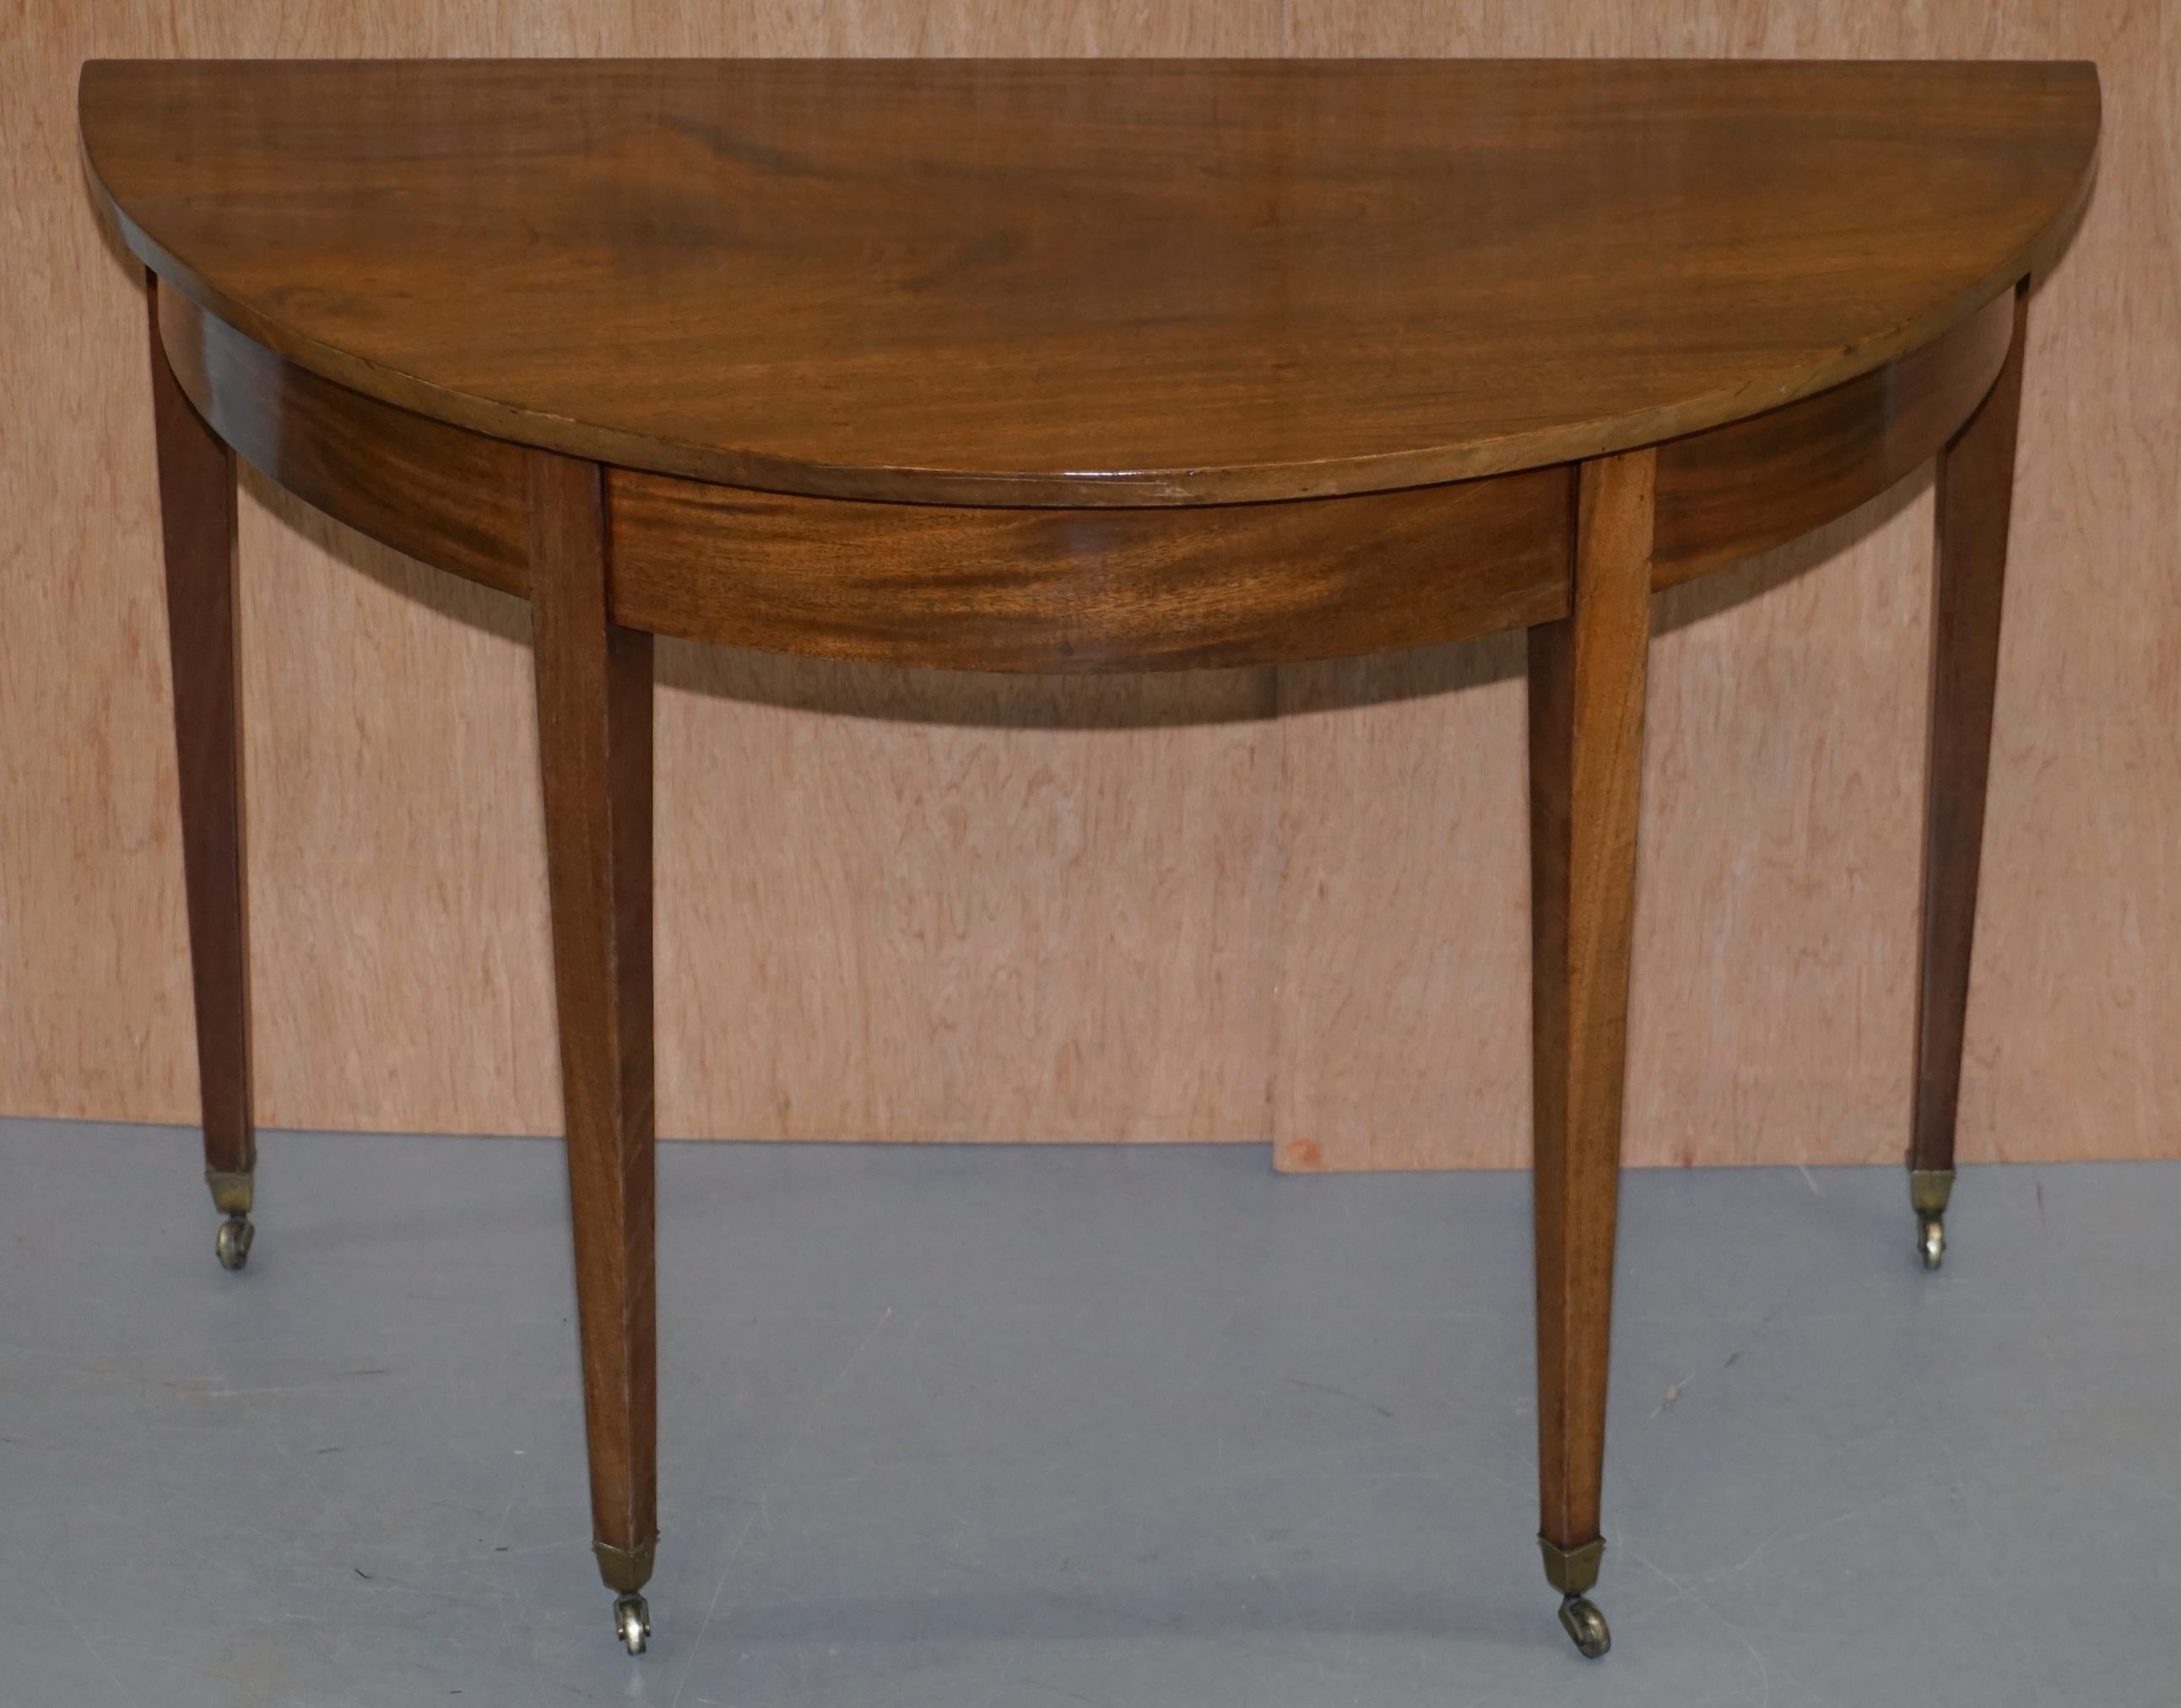 We are delighted to offer for sale this lovely Victorian walnut demilune console table

A very good looking well made and decorative piece, the timber patina is sublime, ideally suited it a hallway with a mirror above

We have lightly cleaned